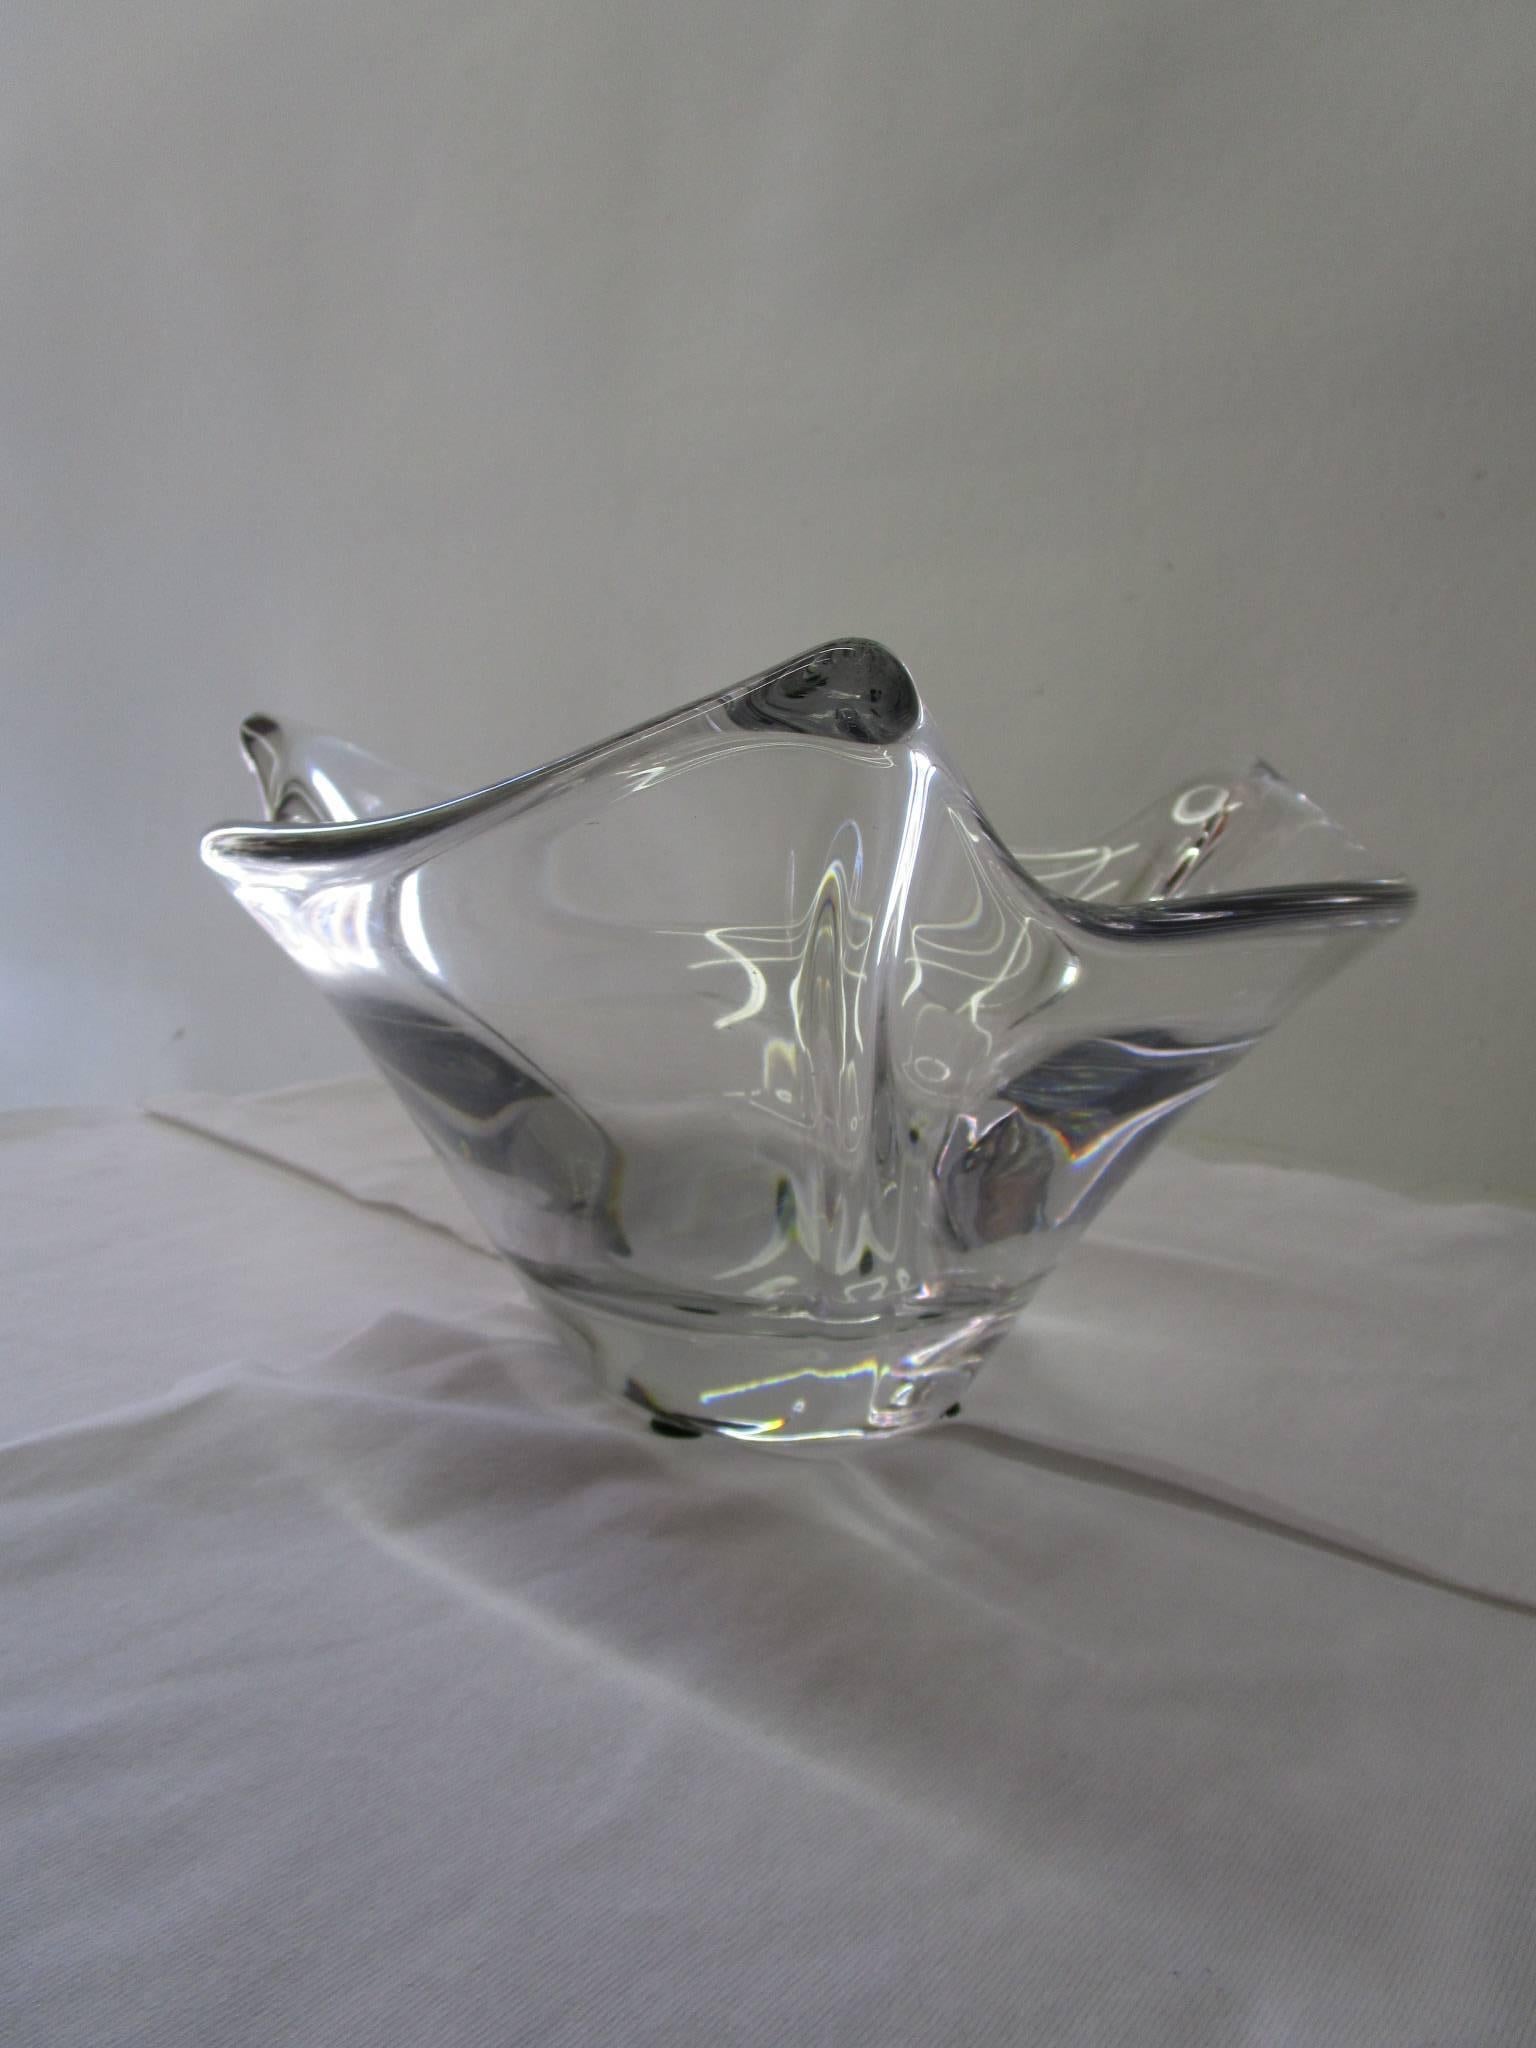 This French crystal bowl has a unique triple peak design. It has an etched signature Daum France. The Daum crystal studio has been based in Nancy, France since the late 1800s.